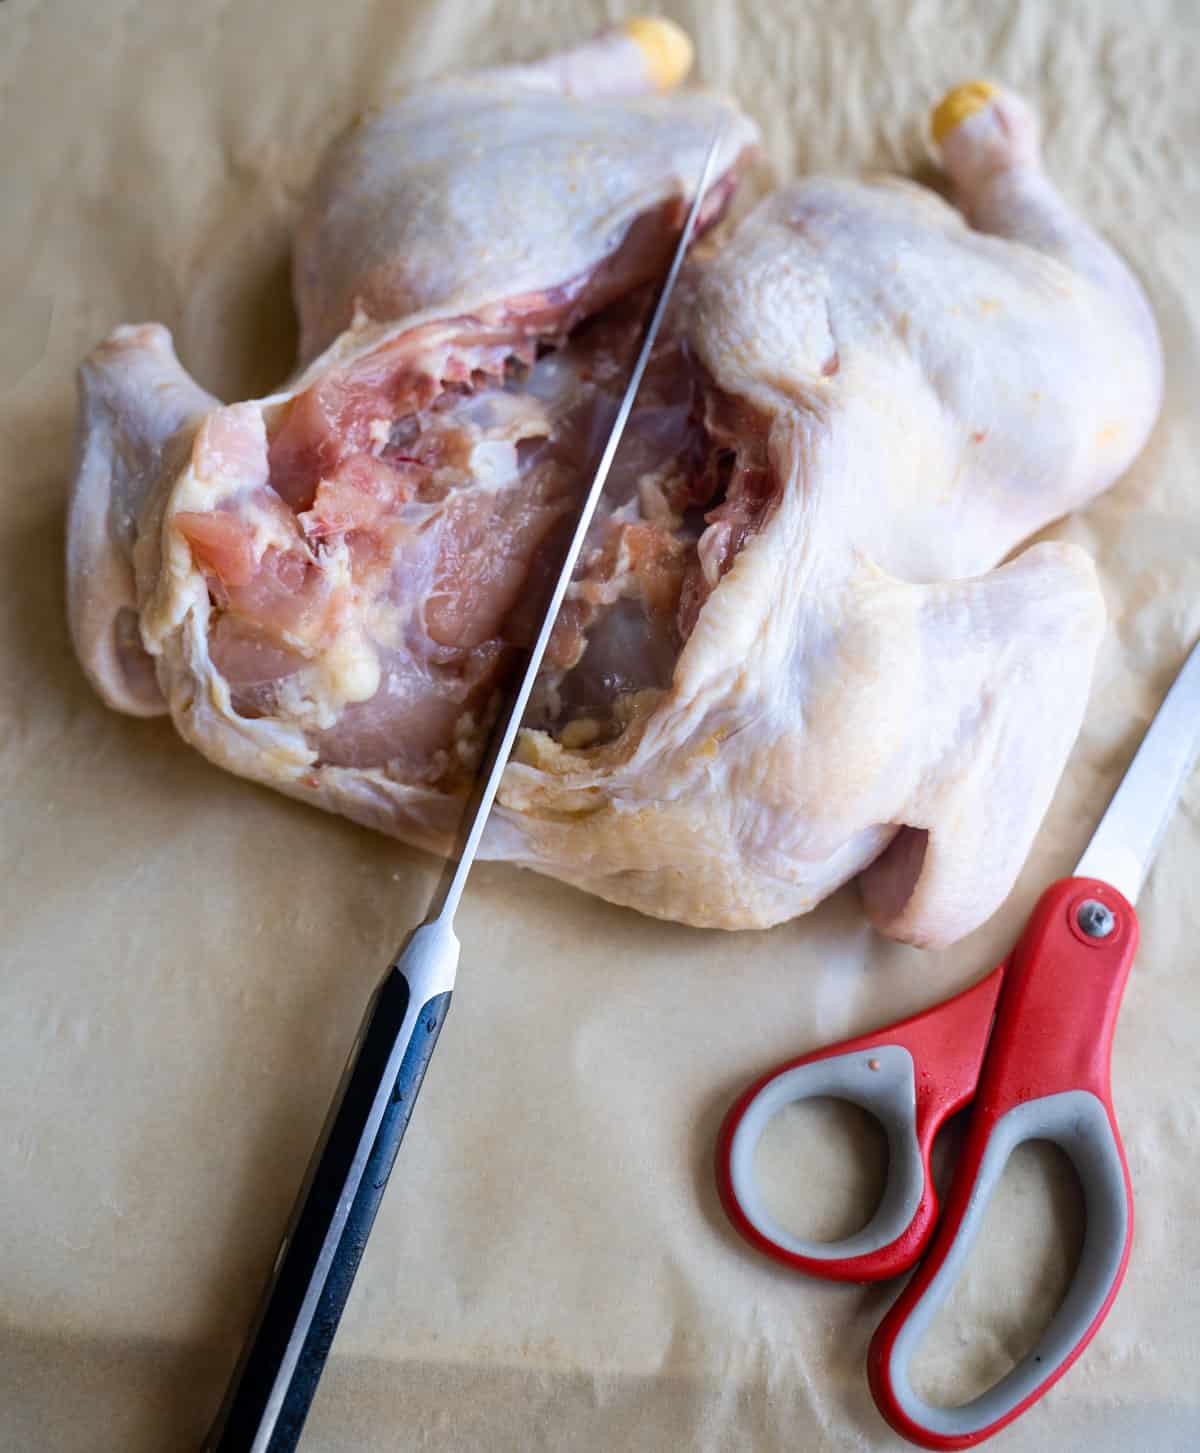 Step 3 of the step-by-step spatchcock chicken sunday supper recipe showing knife scoring down the sternum of the chicken breastbone with kitchen shears laying next to the bird sitting on the counter